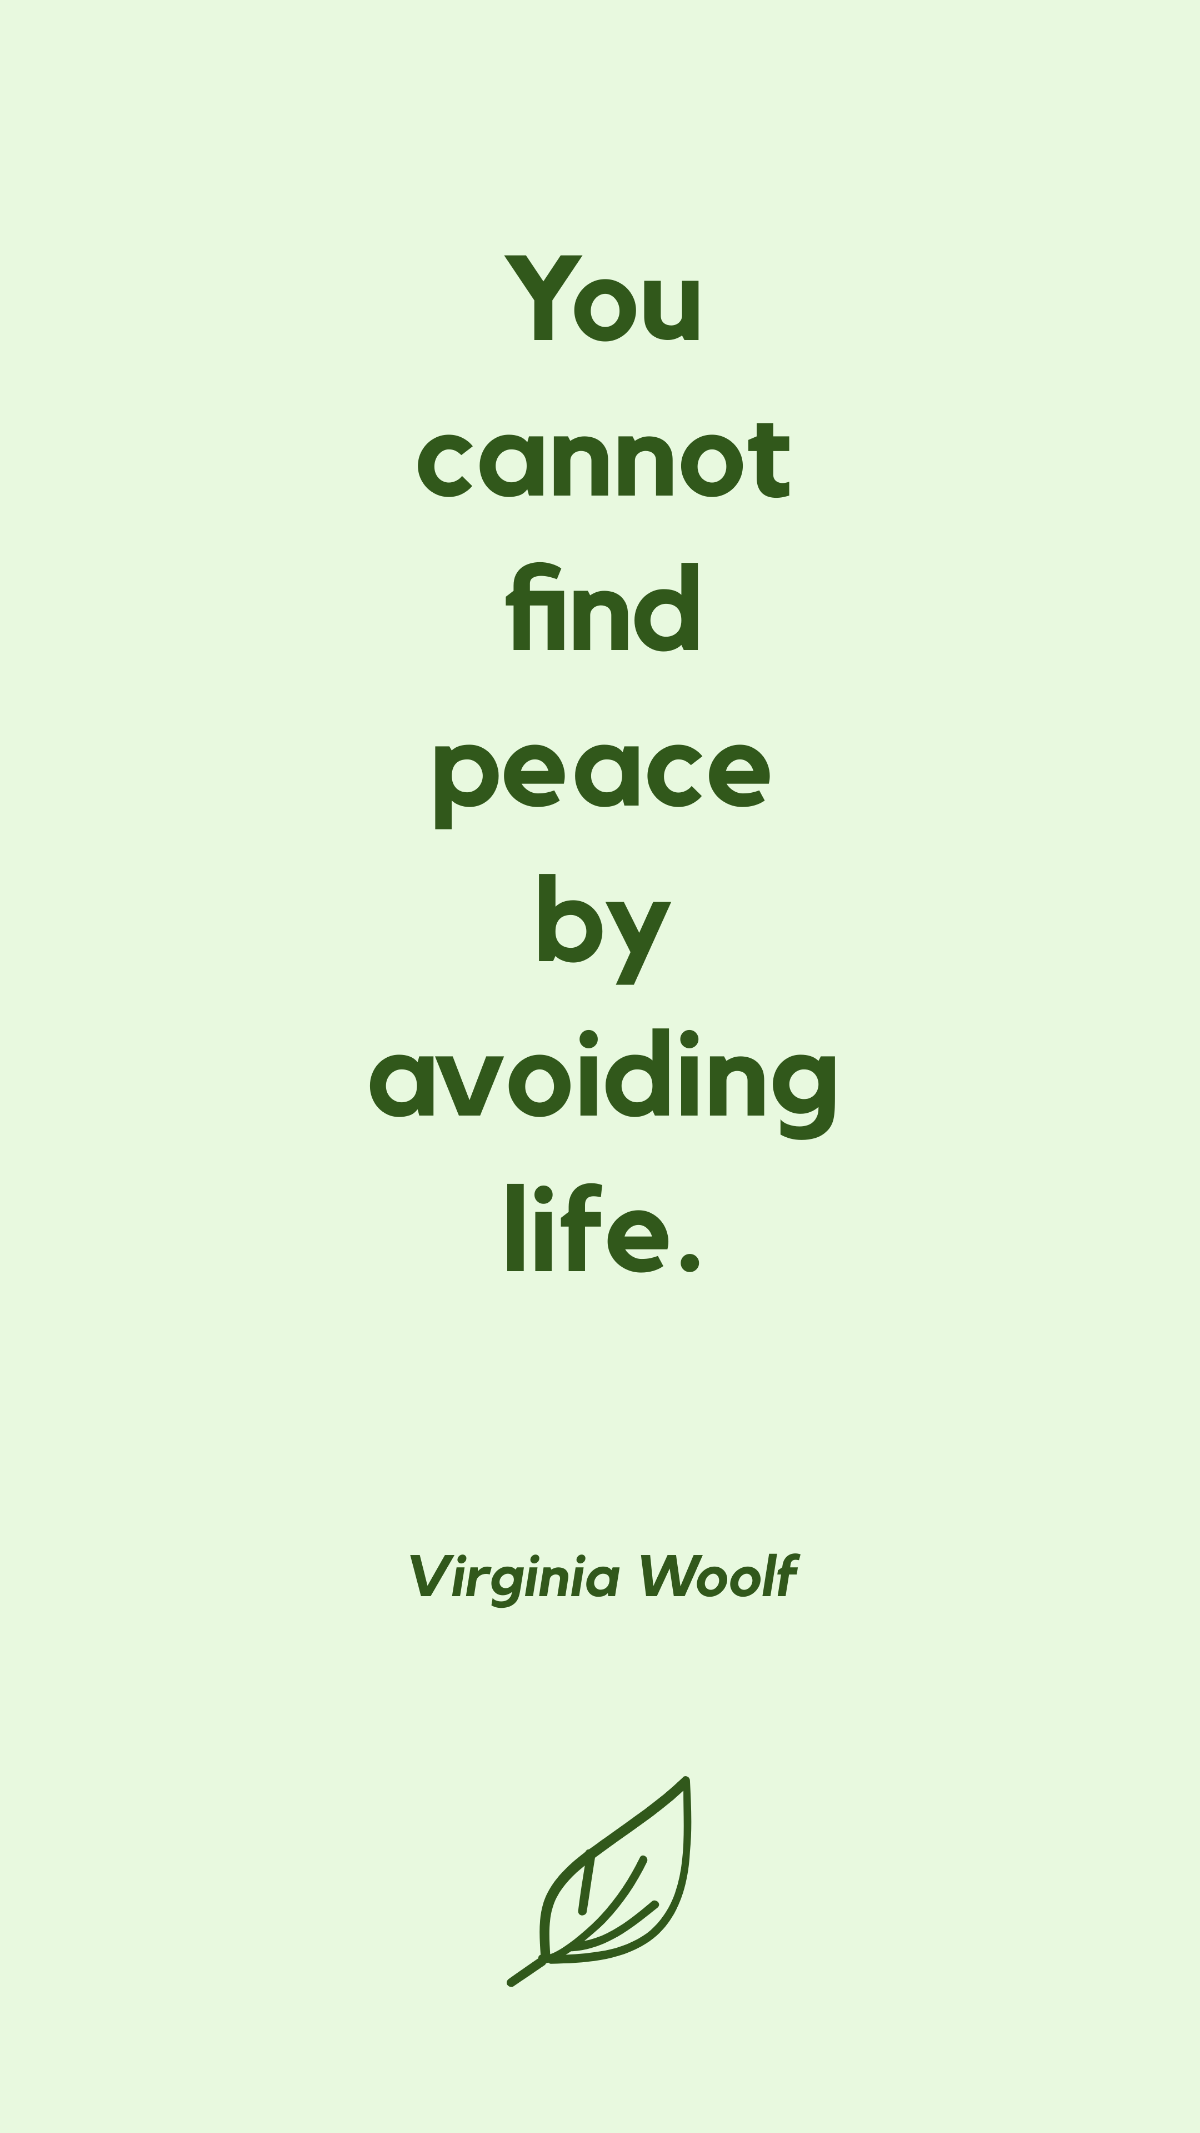 Virginia Woolf - You cannot find peace by avoiding life.